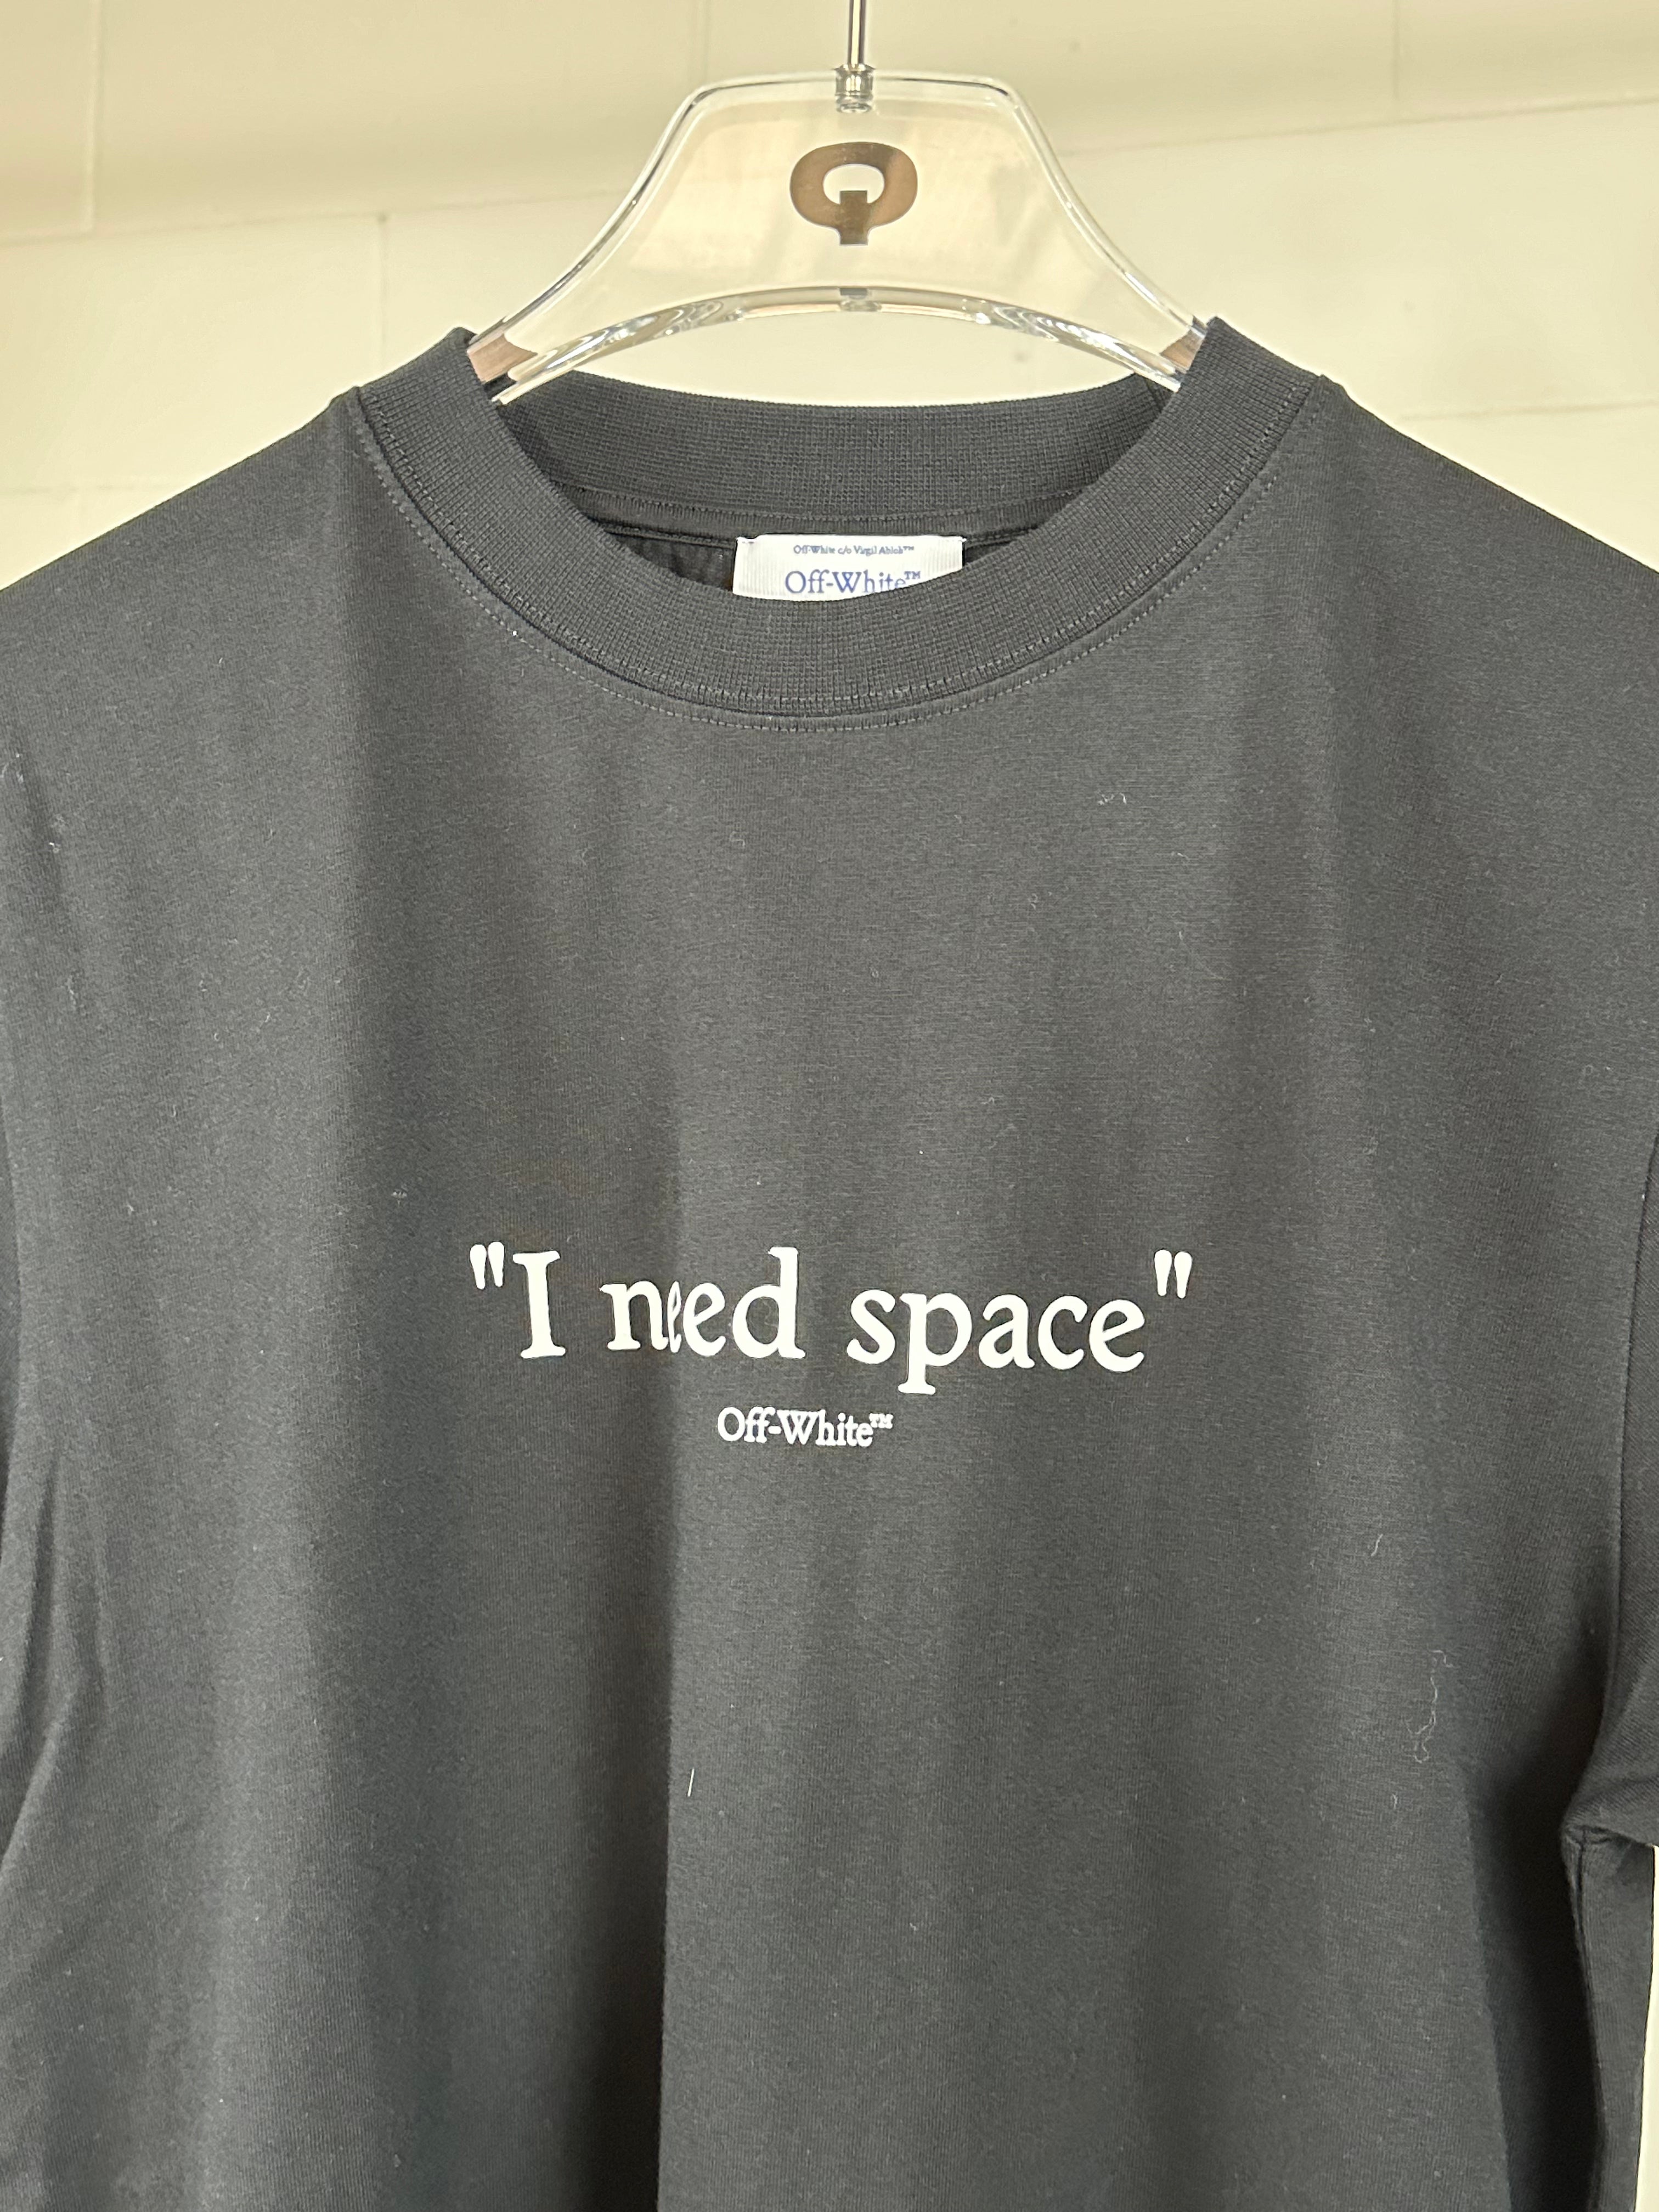 Give Me Space Slim T-shirt